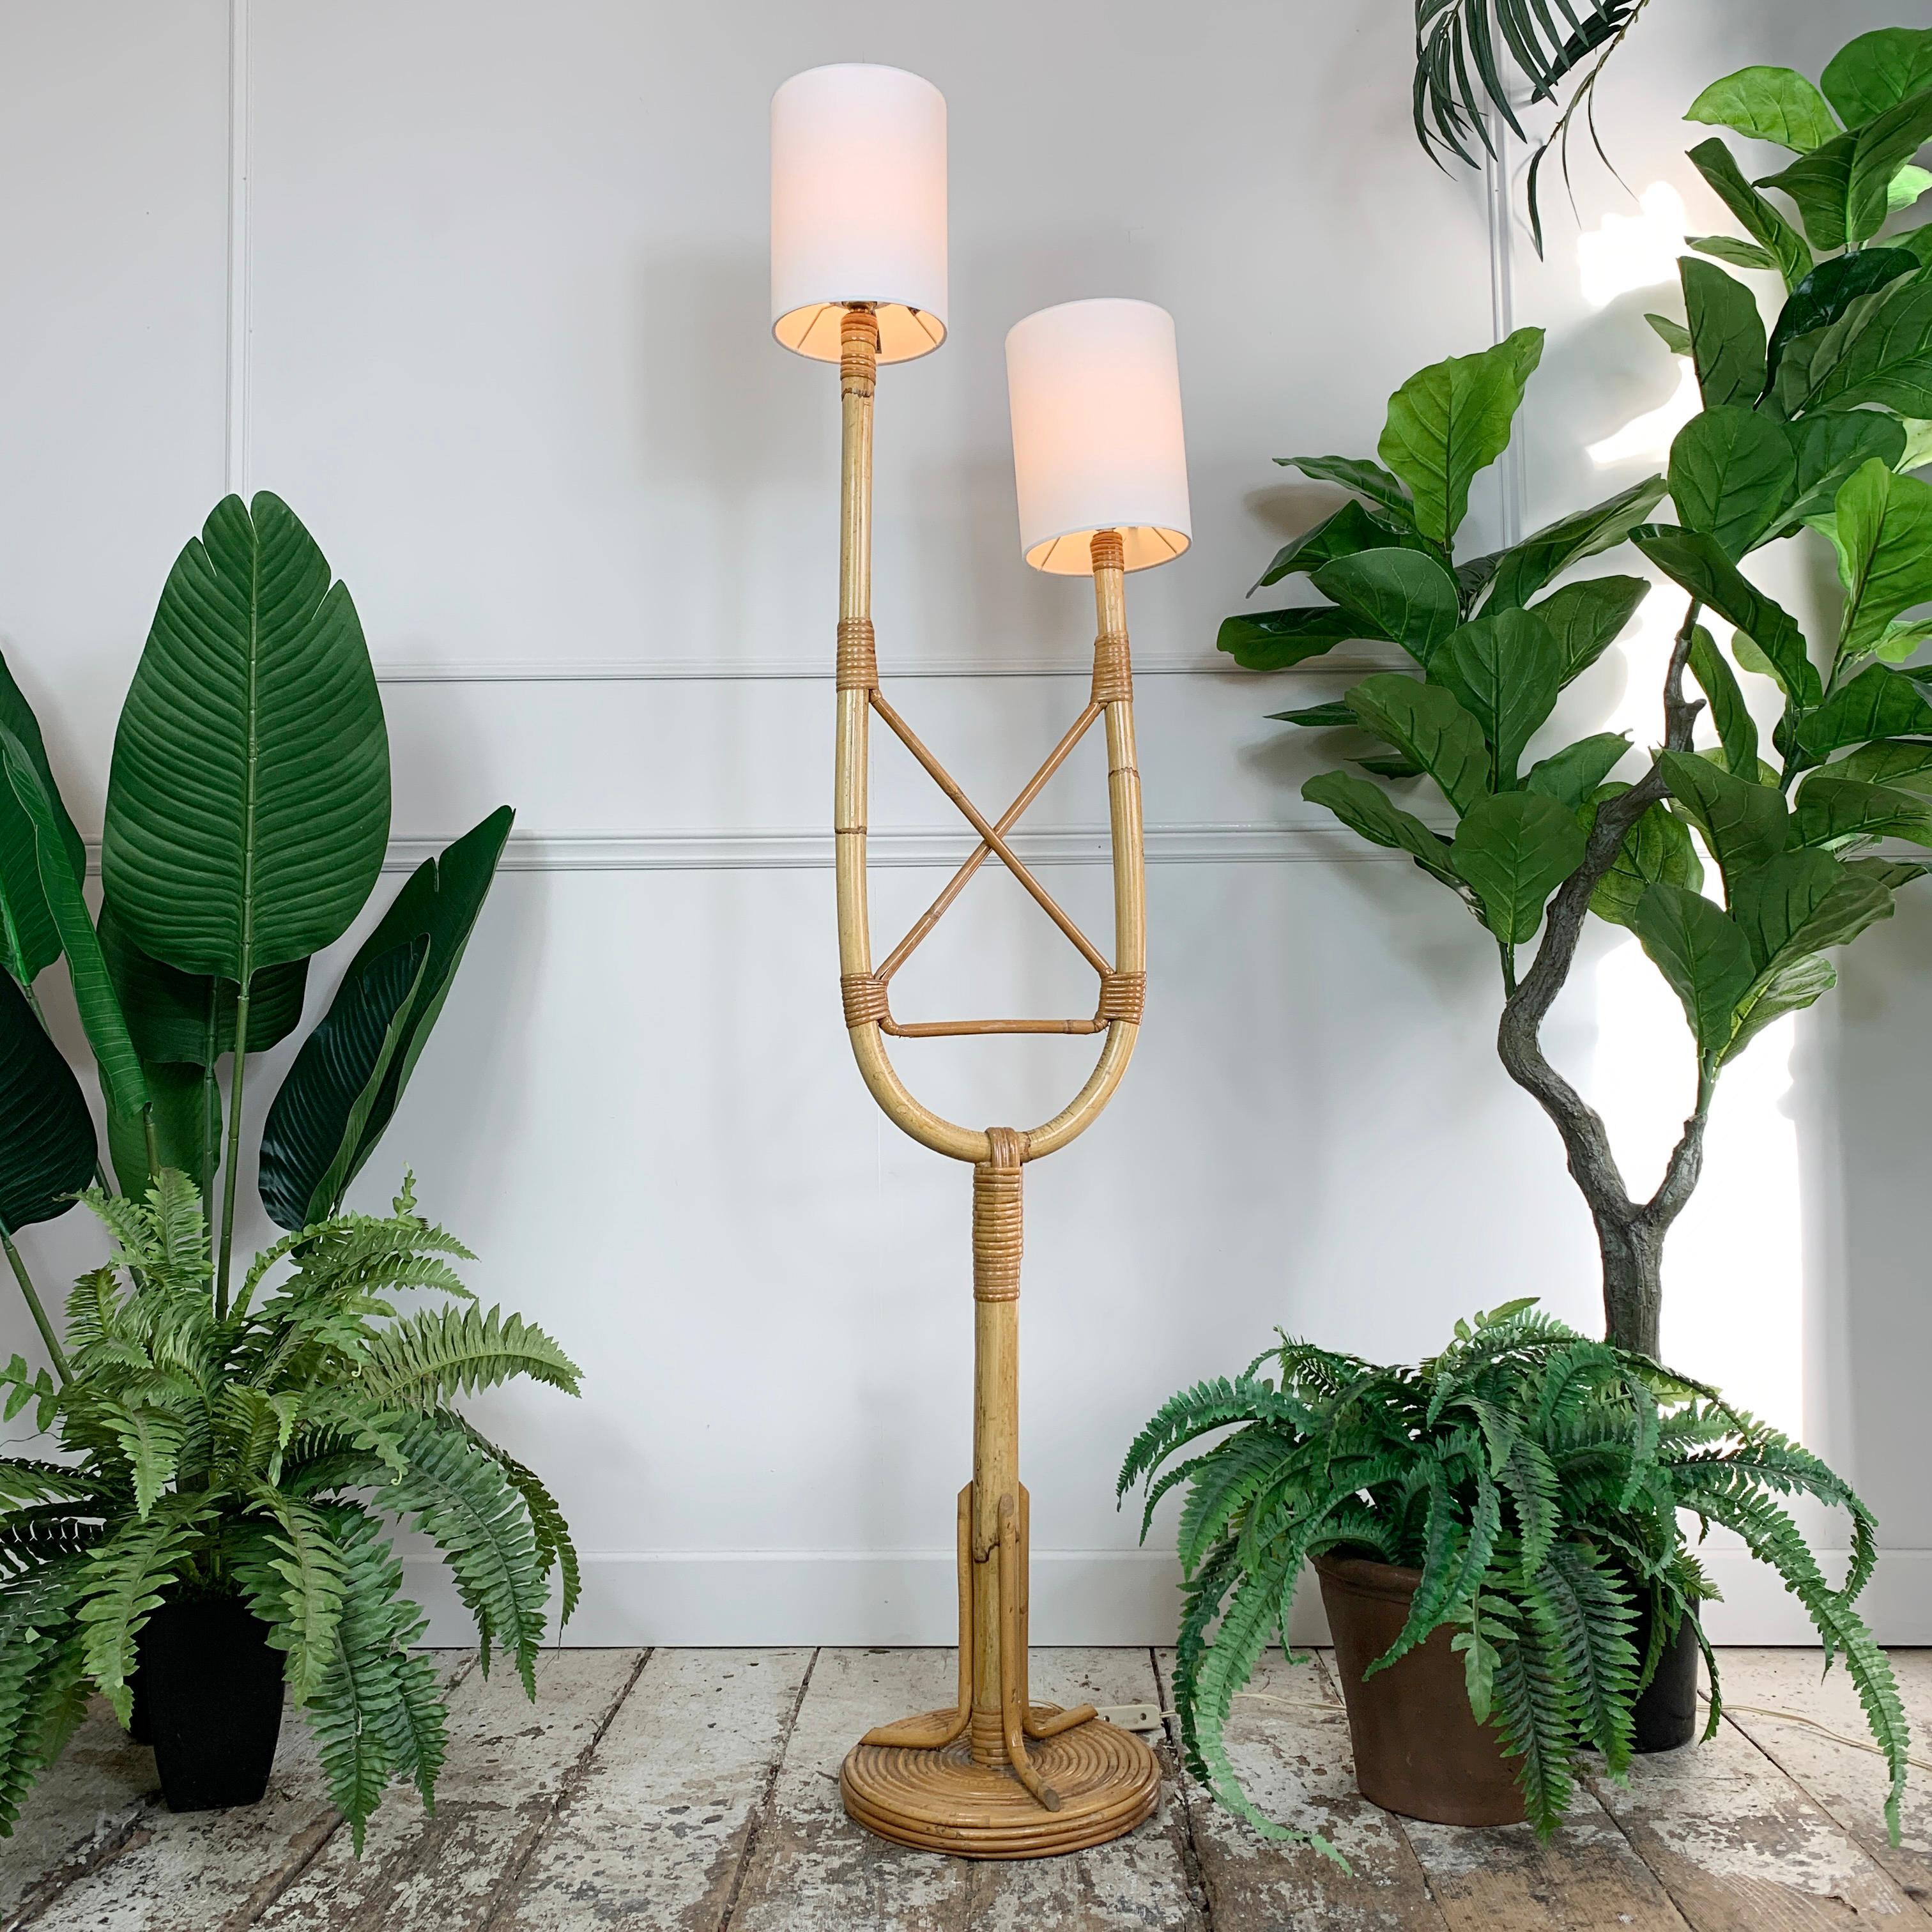 Natural rattan floor lamp by Louis Sognot
France 1950's
 
Hand crafted rattan, shaped and curved into a fabulous organic shape
Stylized twisted reed base
 
144cm height, 38cm width, 27cm width across base
Shades 20cm height x 15cm width

There are 2